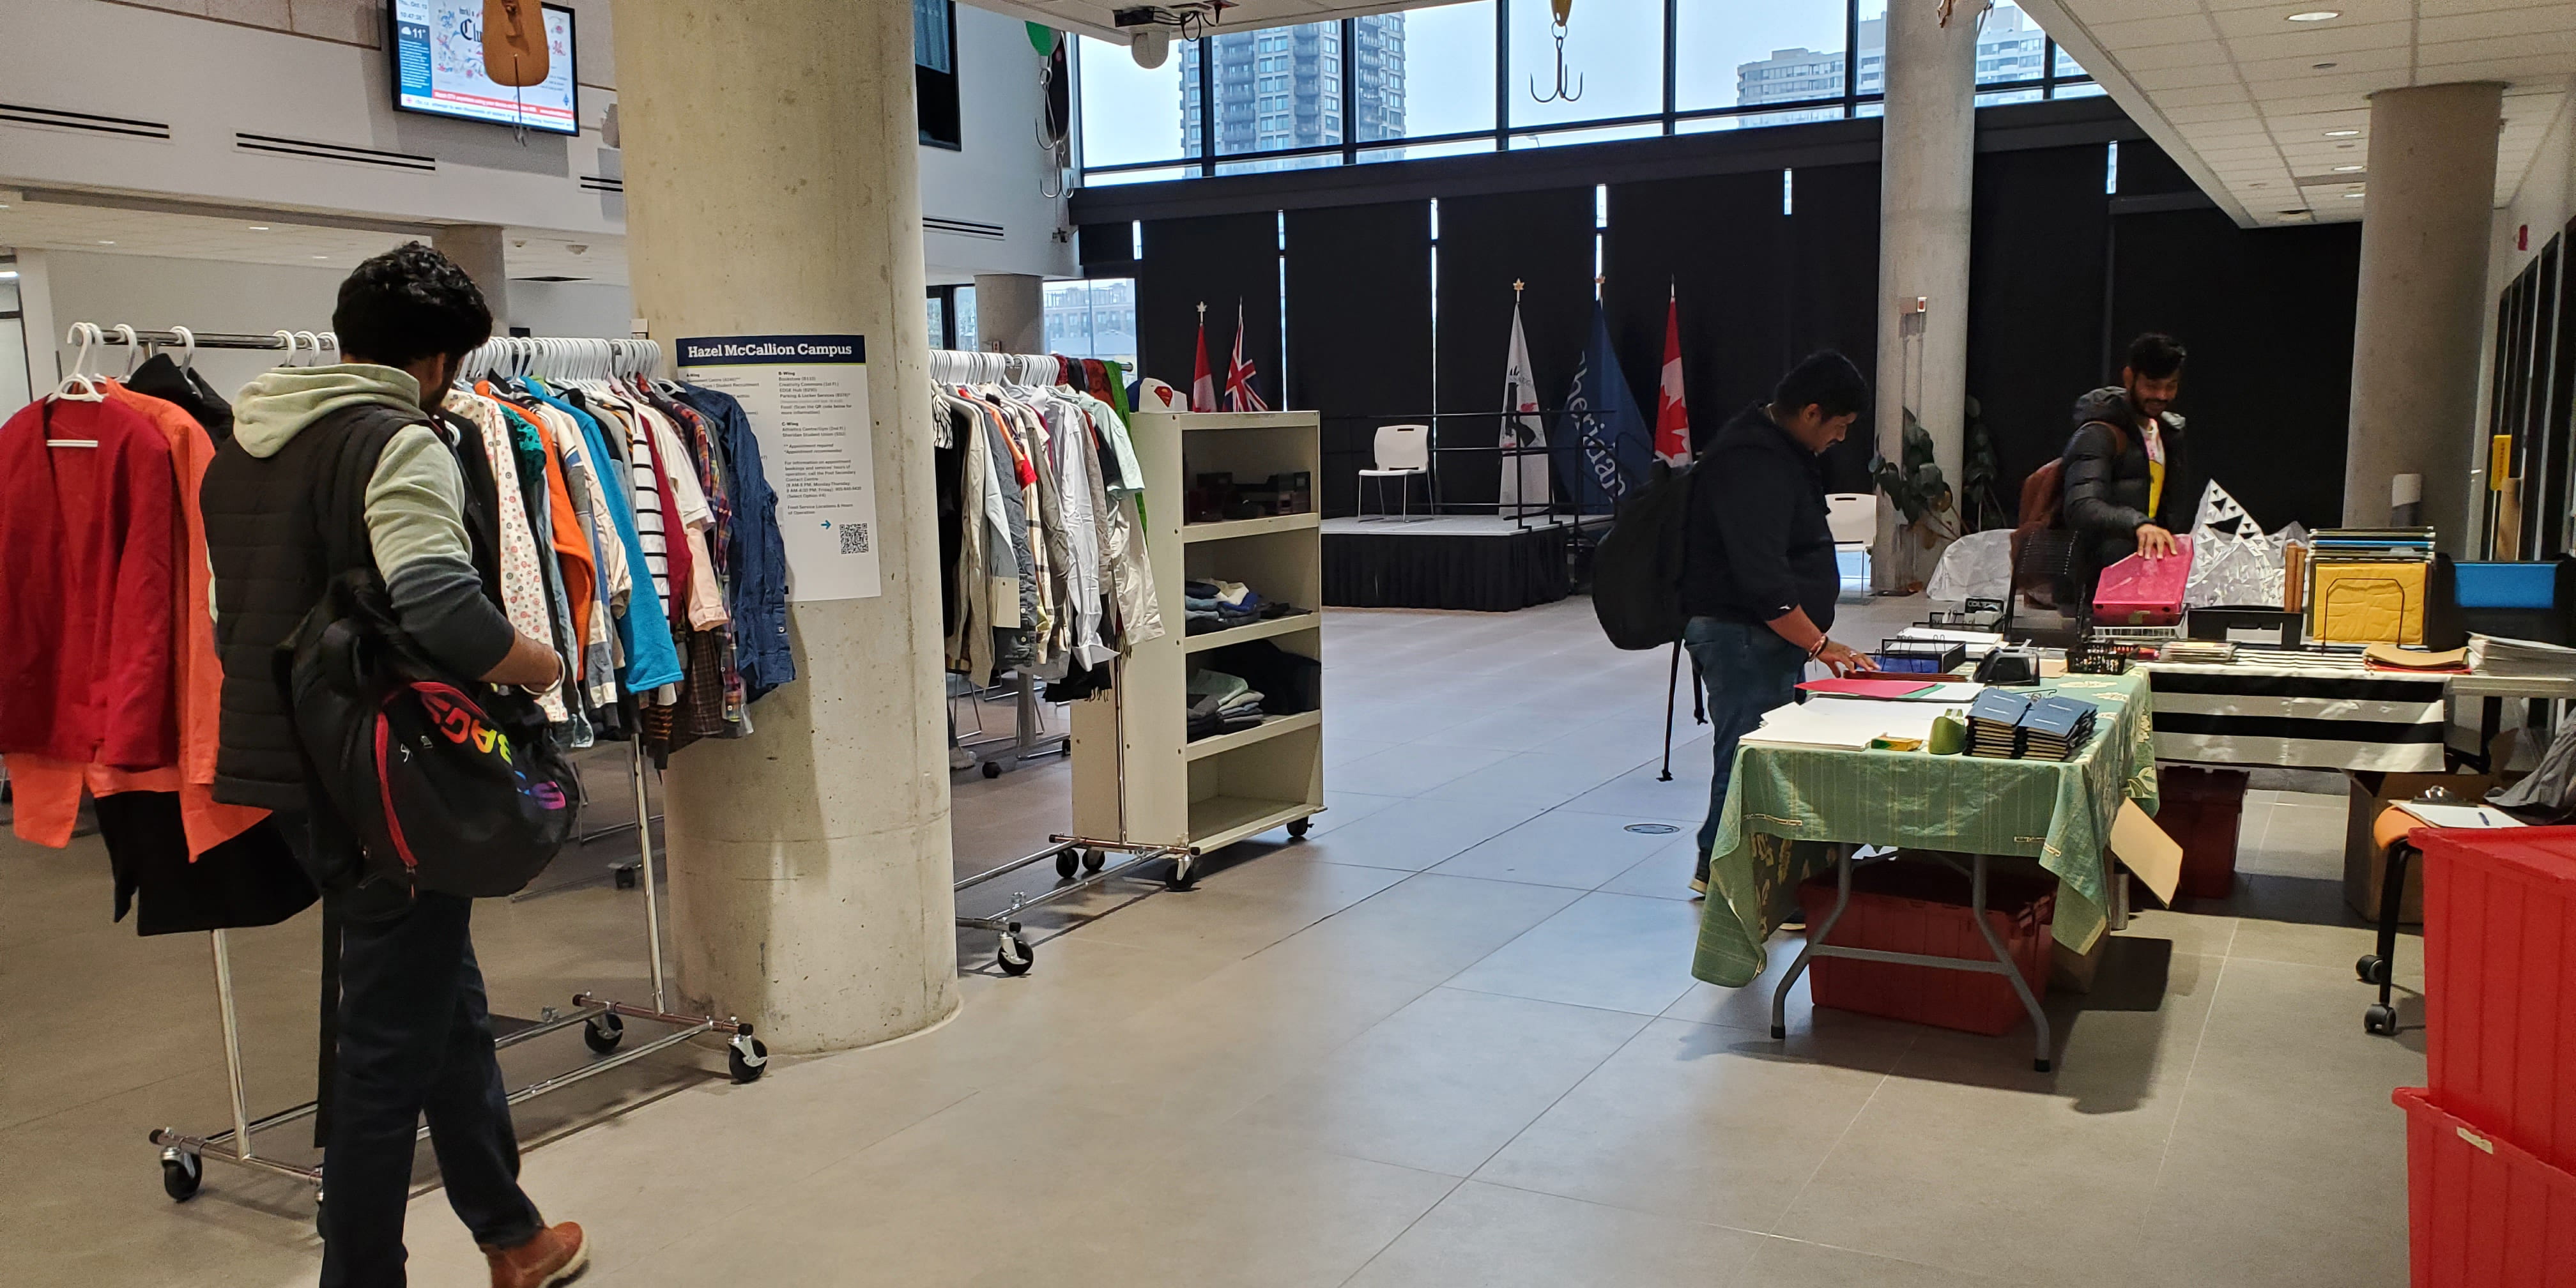 Students at the Freeuse pop-up shop event HMC Campus.